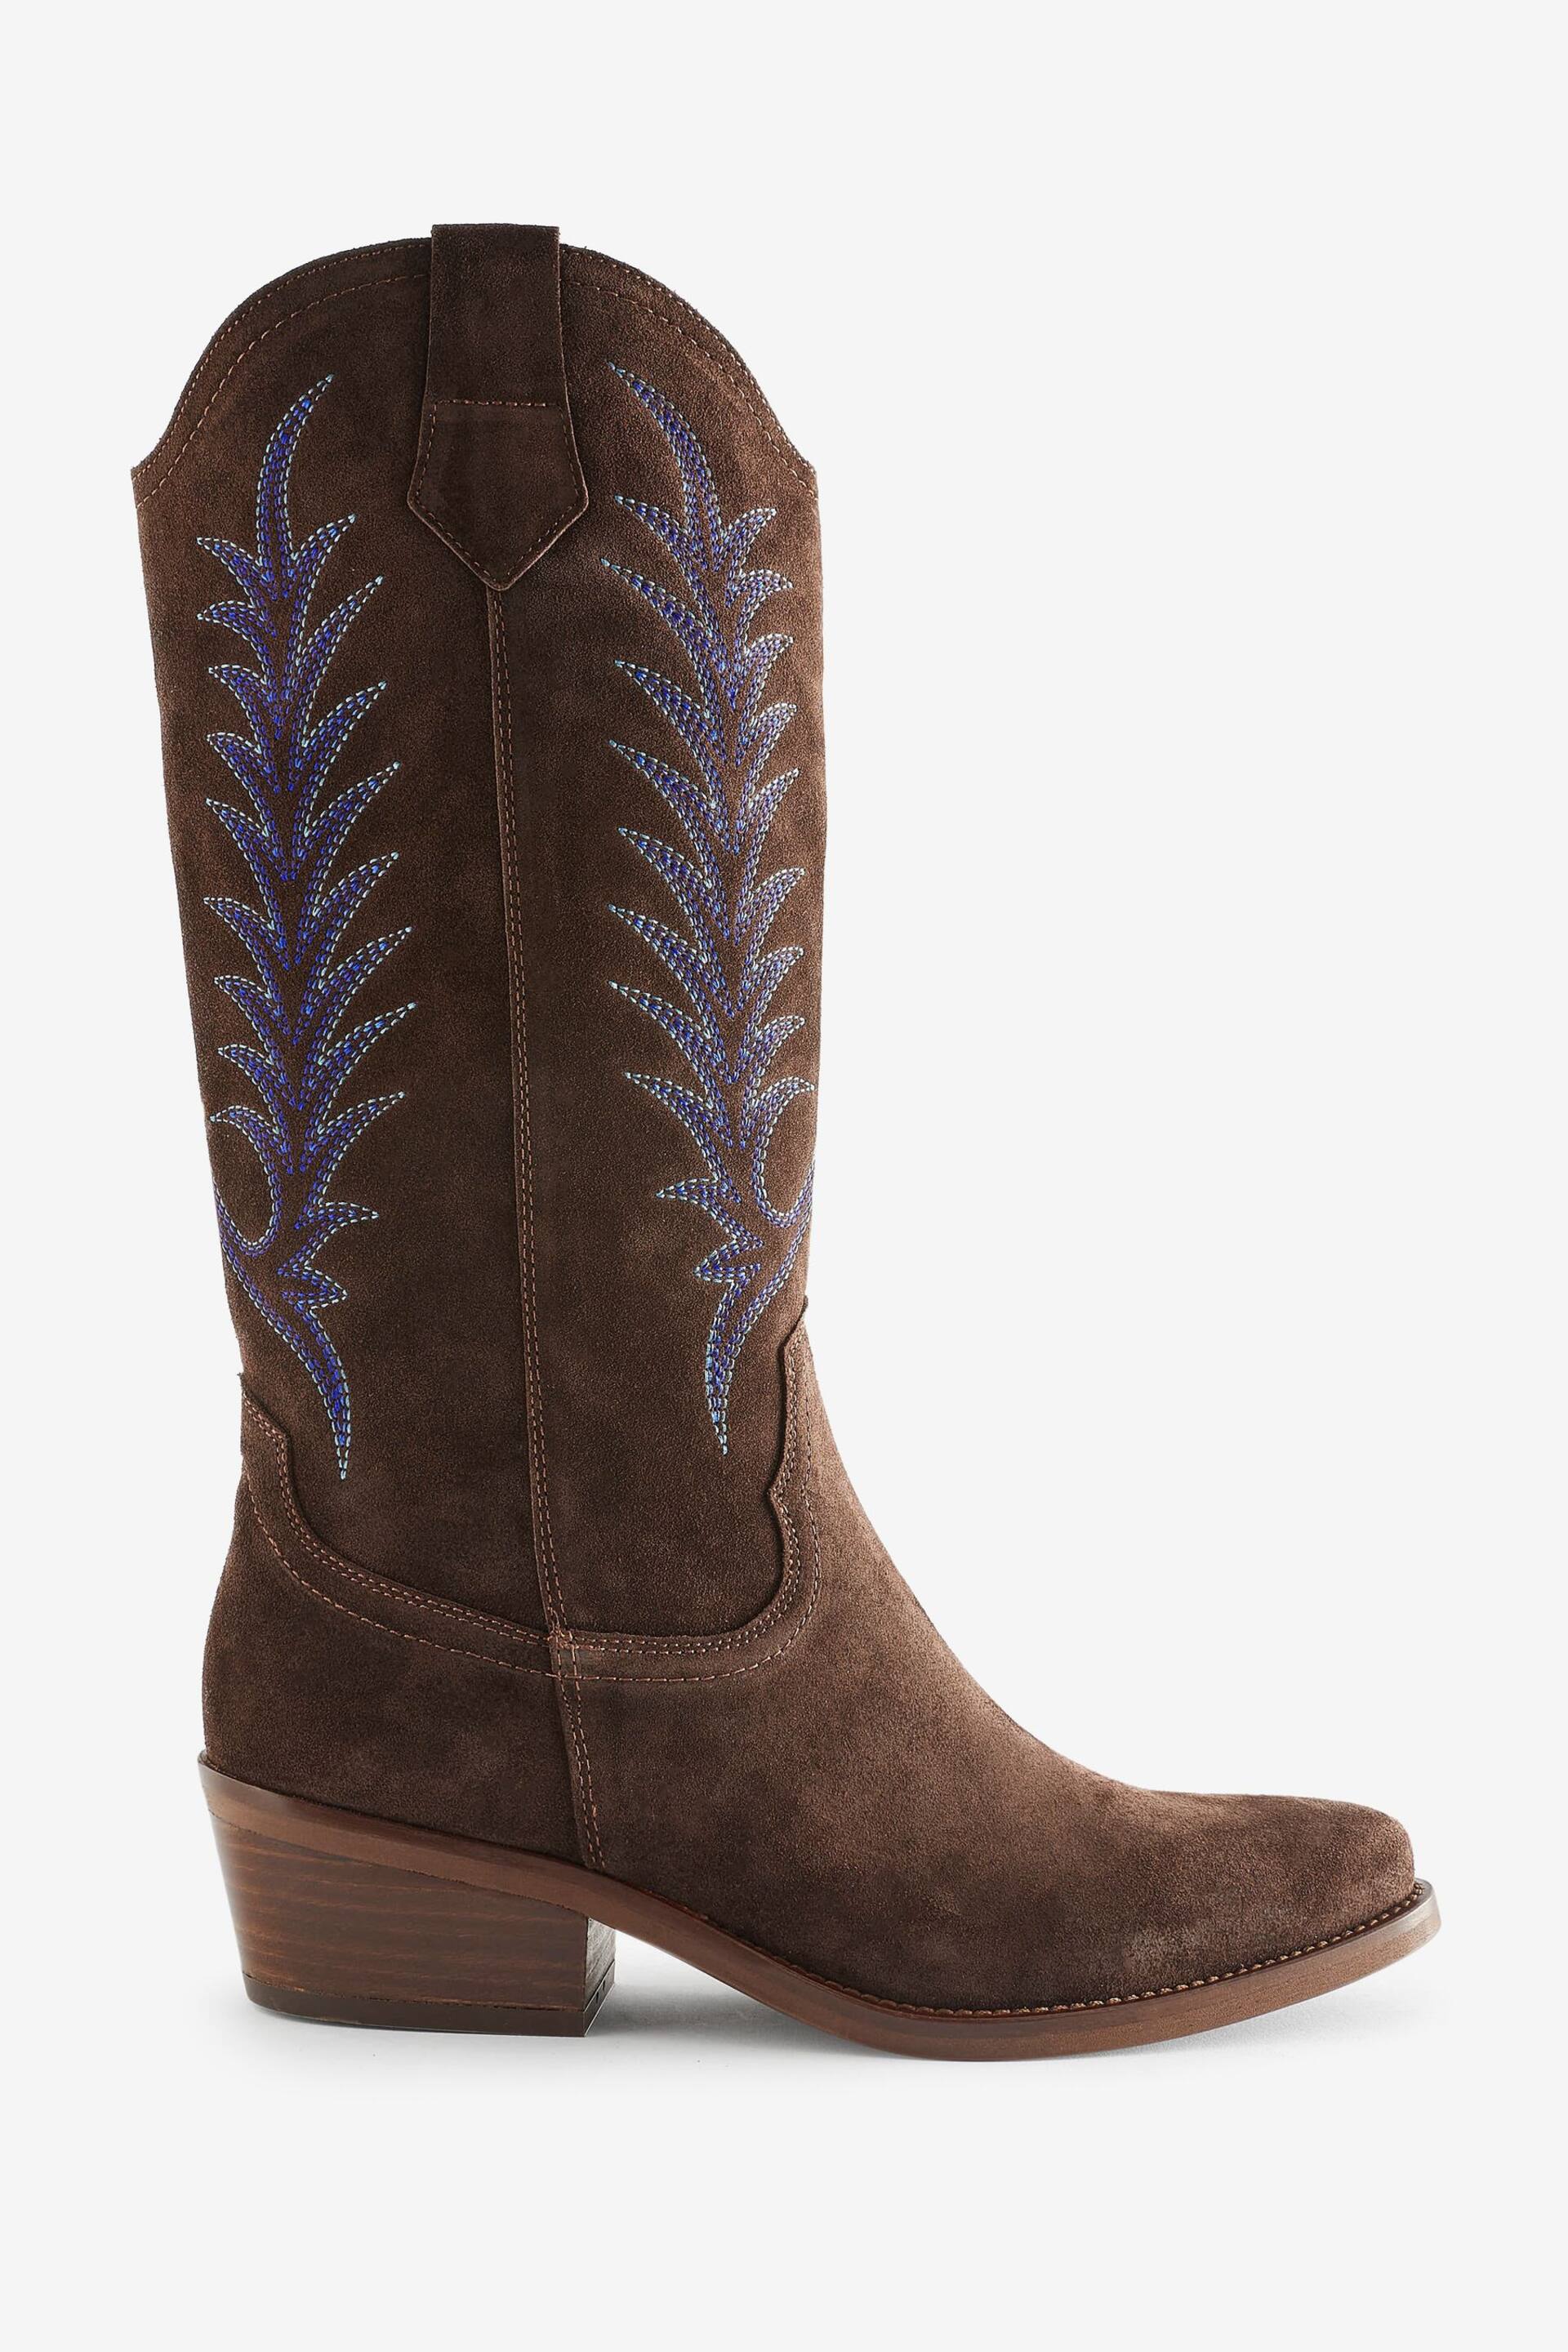 Penelope Chilvers Goldie Embroidered Cowboy Brown Boots - Image 2 of 7